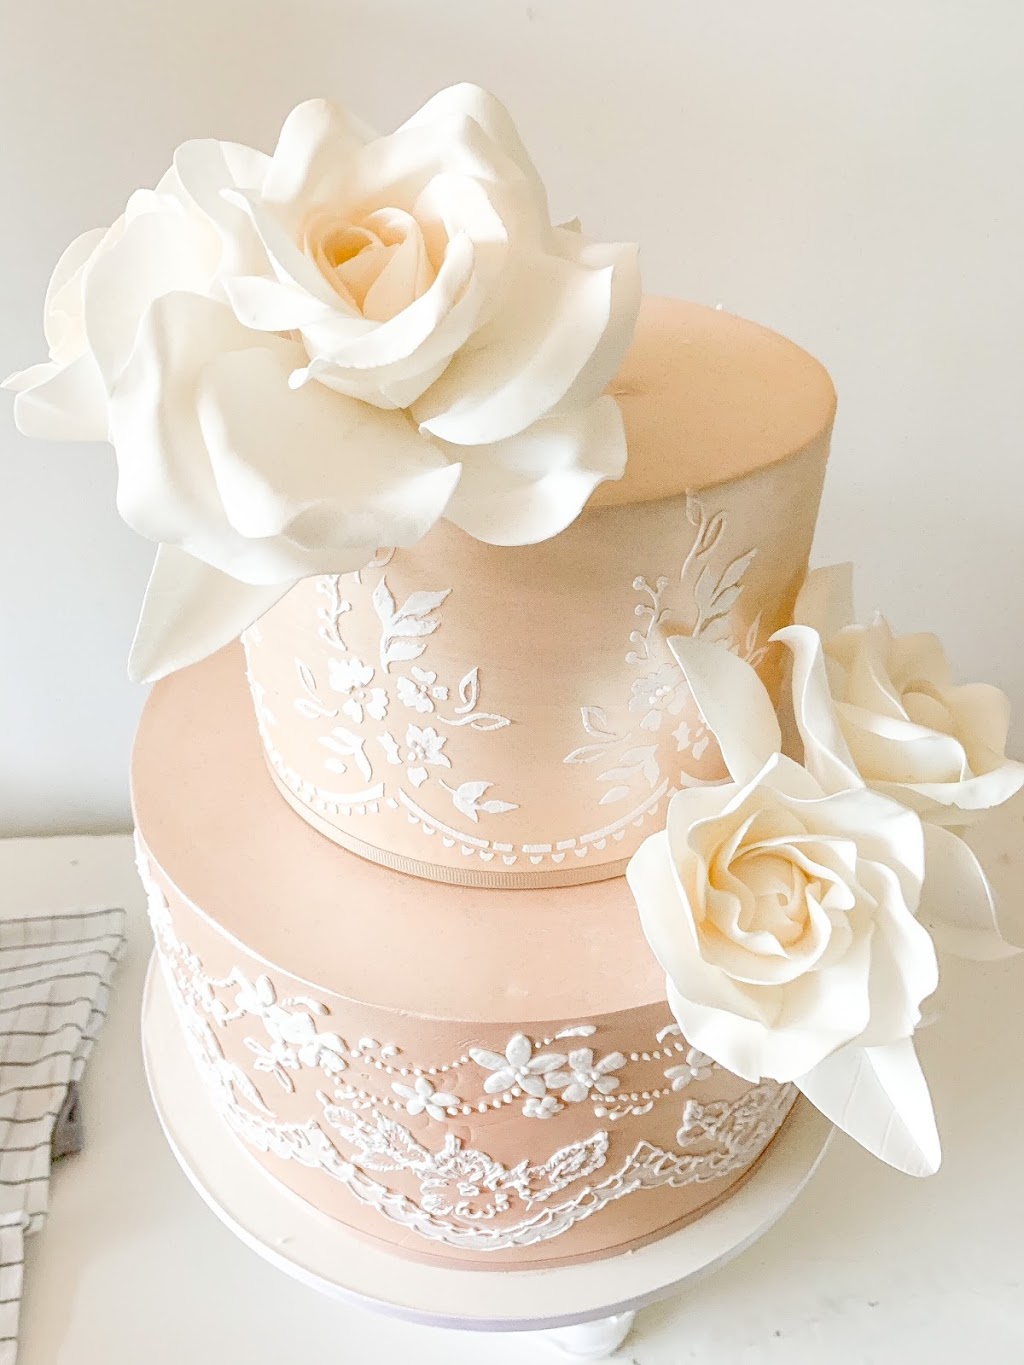 Philosophie Couture Cakes | bakery | 1079 Barrenjoey Rd, Palm Beach NSW 2108, Australia | 0450080212 OR +61 450 080 212